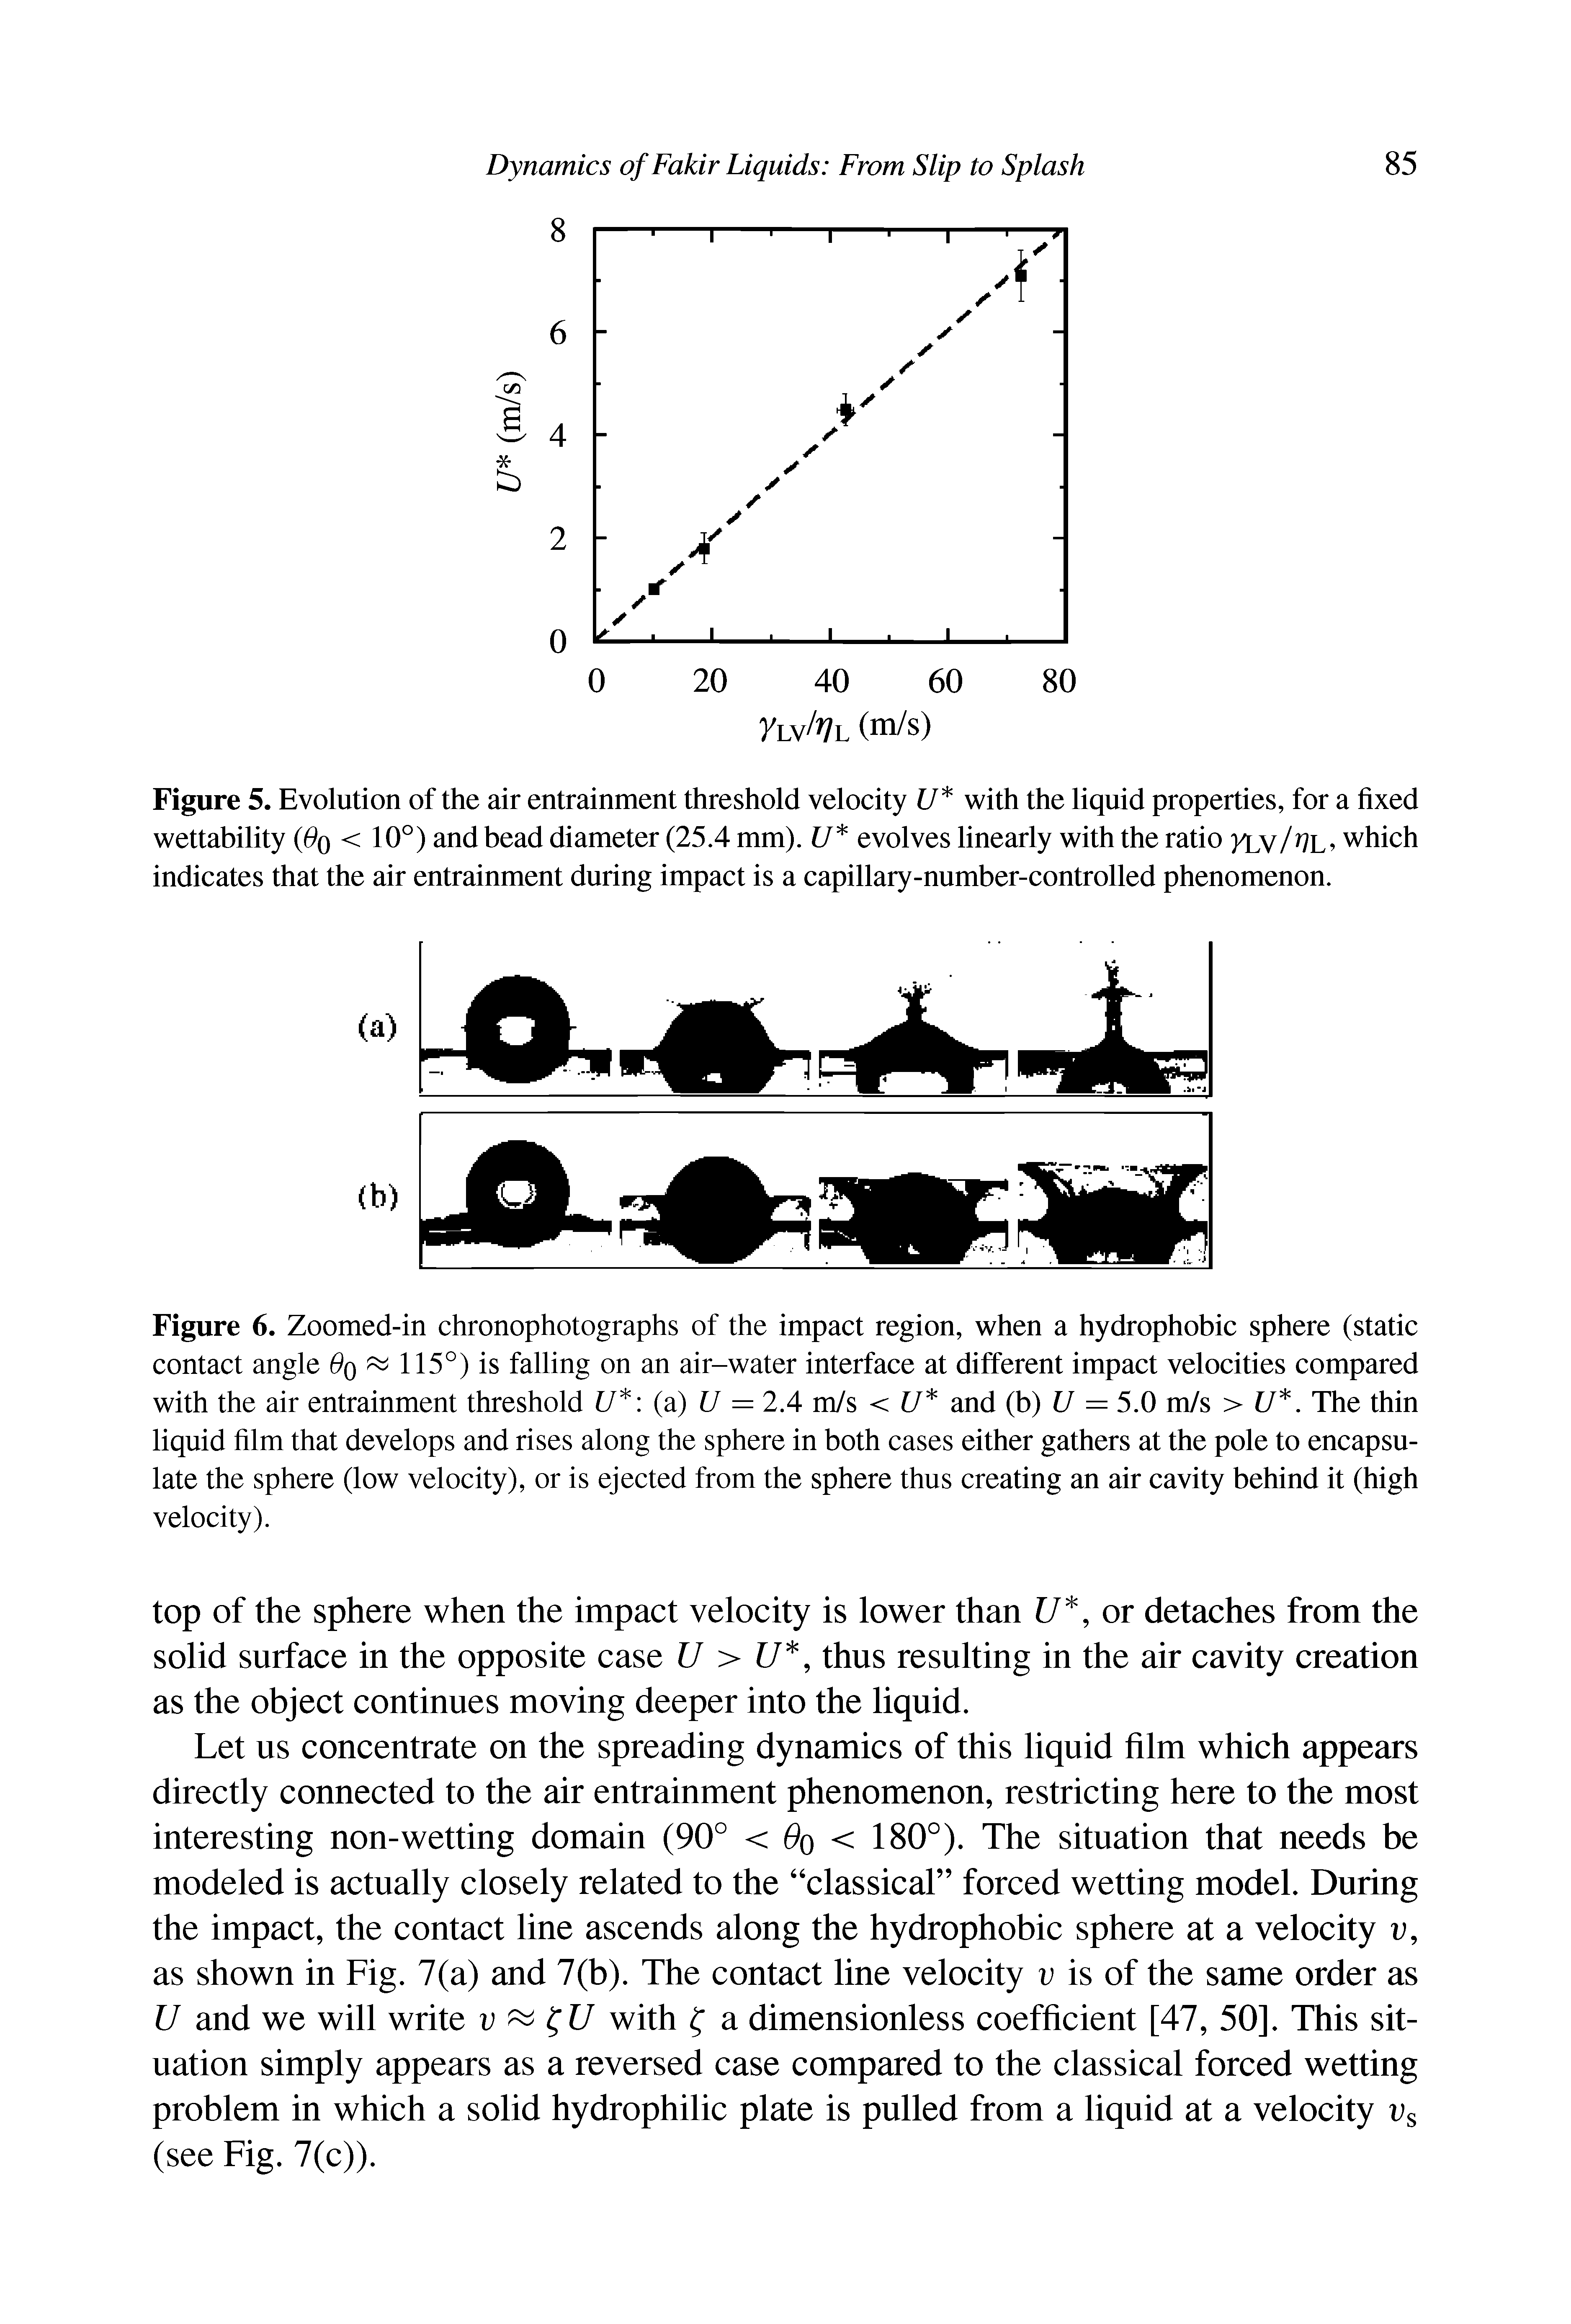 Figure 6. Zoomed-in chronophotographs of the impact region, when a hydrophobic sphere (static contact angle 6>q 115°) is falling on an air-water interface at different impact velocities compared with the air entrainment threshold f/ (a) U = 2.4 m/s < f/ and (b) U = 5.0 m/s > f/. The thin liquid film that develops and rises along the sphere in both cases either gathers at the pole to encapsulate the sphere (low velocity), or is ejected from the sphere thus creating an air cavity behind it (high velocity).